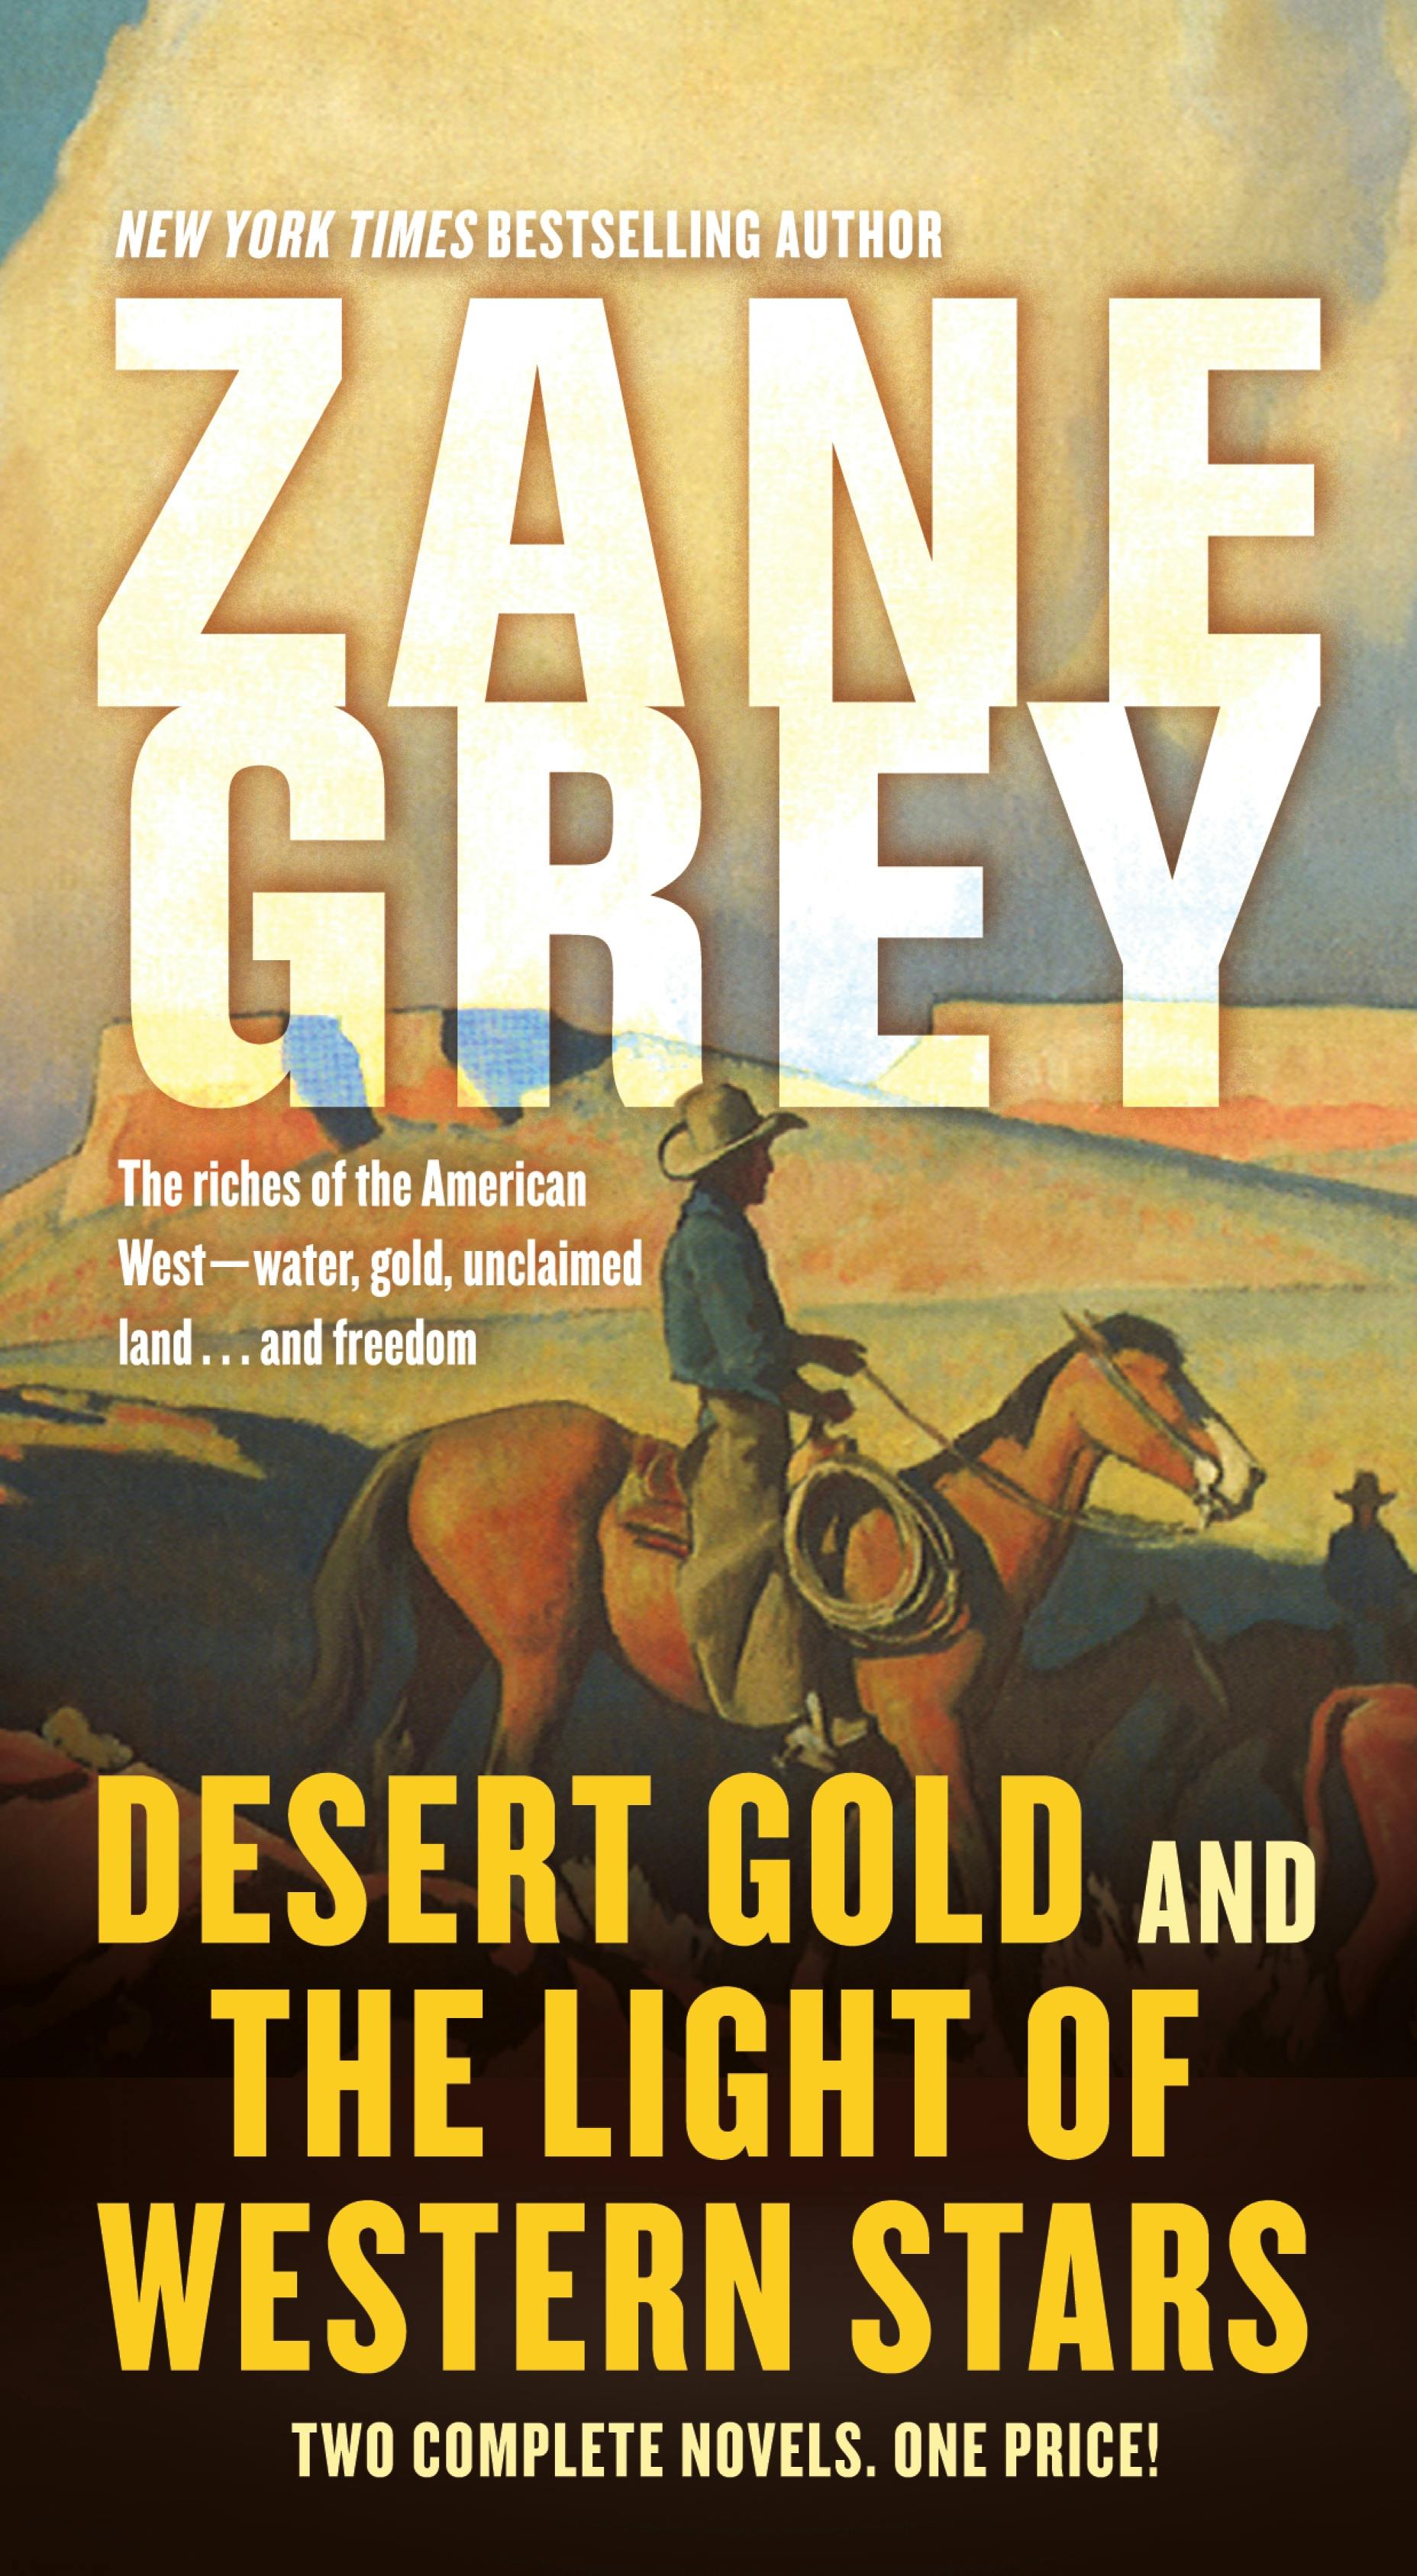 Cover for the book titled as: Desert Gold and The Light of Western Stars